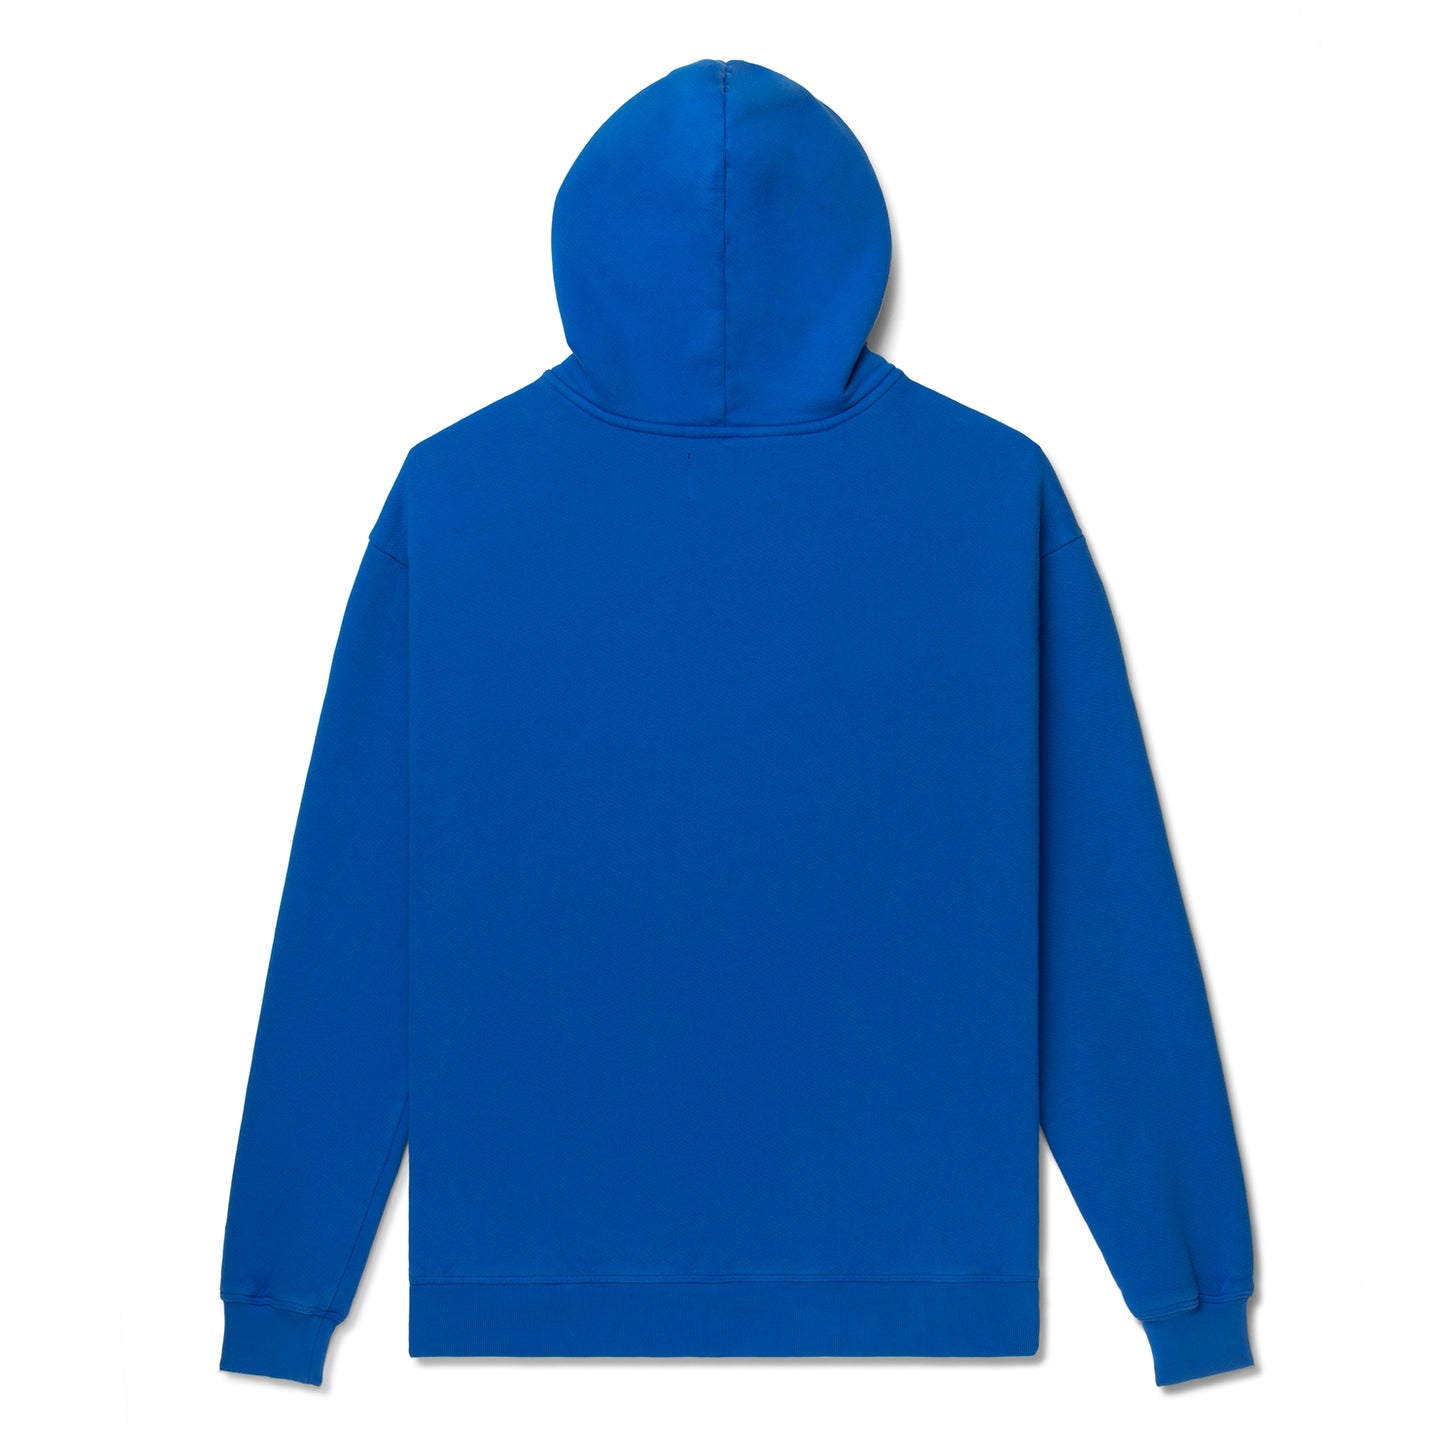 Concepts Clarity Hoodie (Navy)